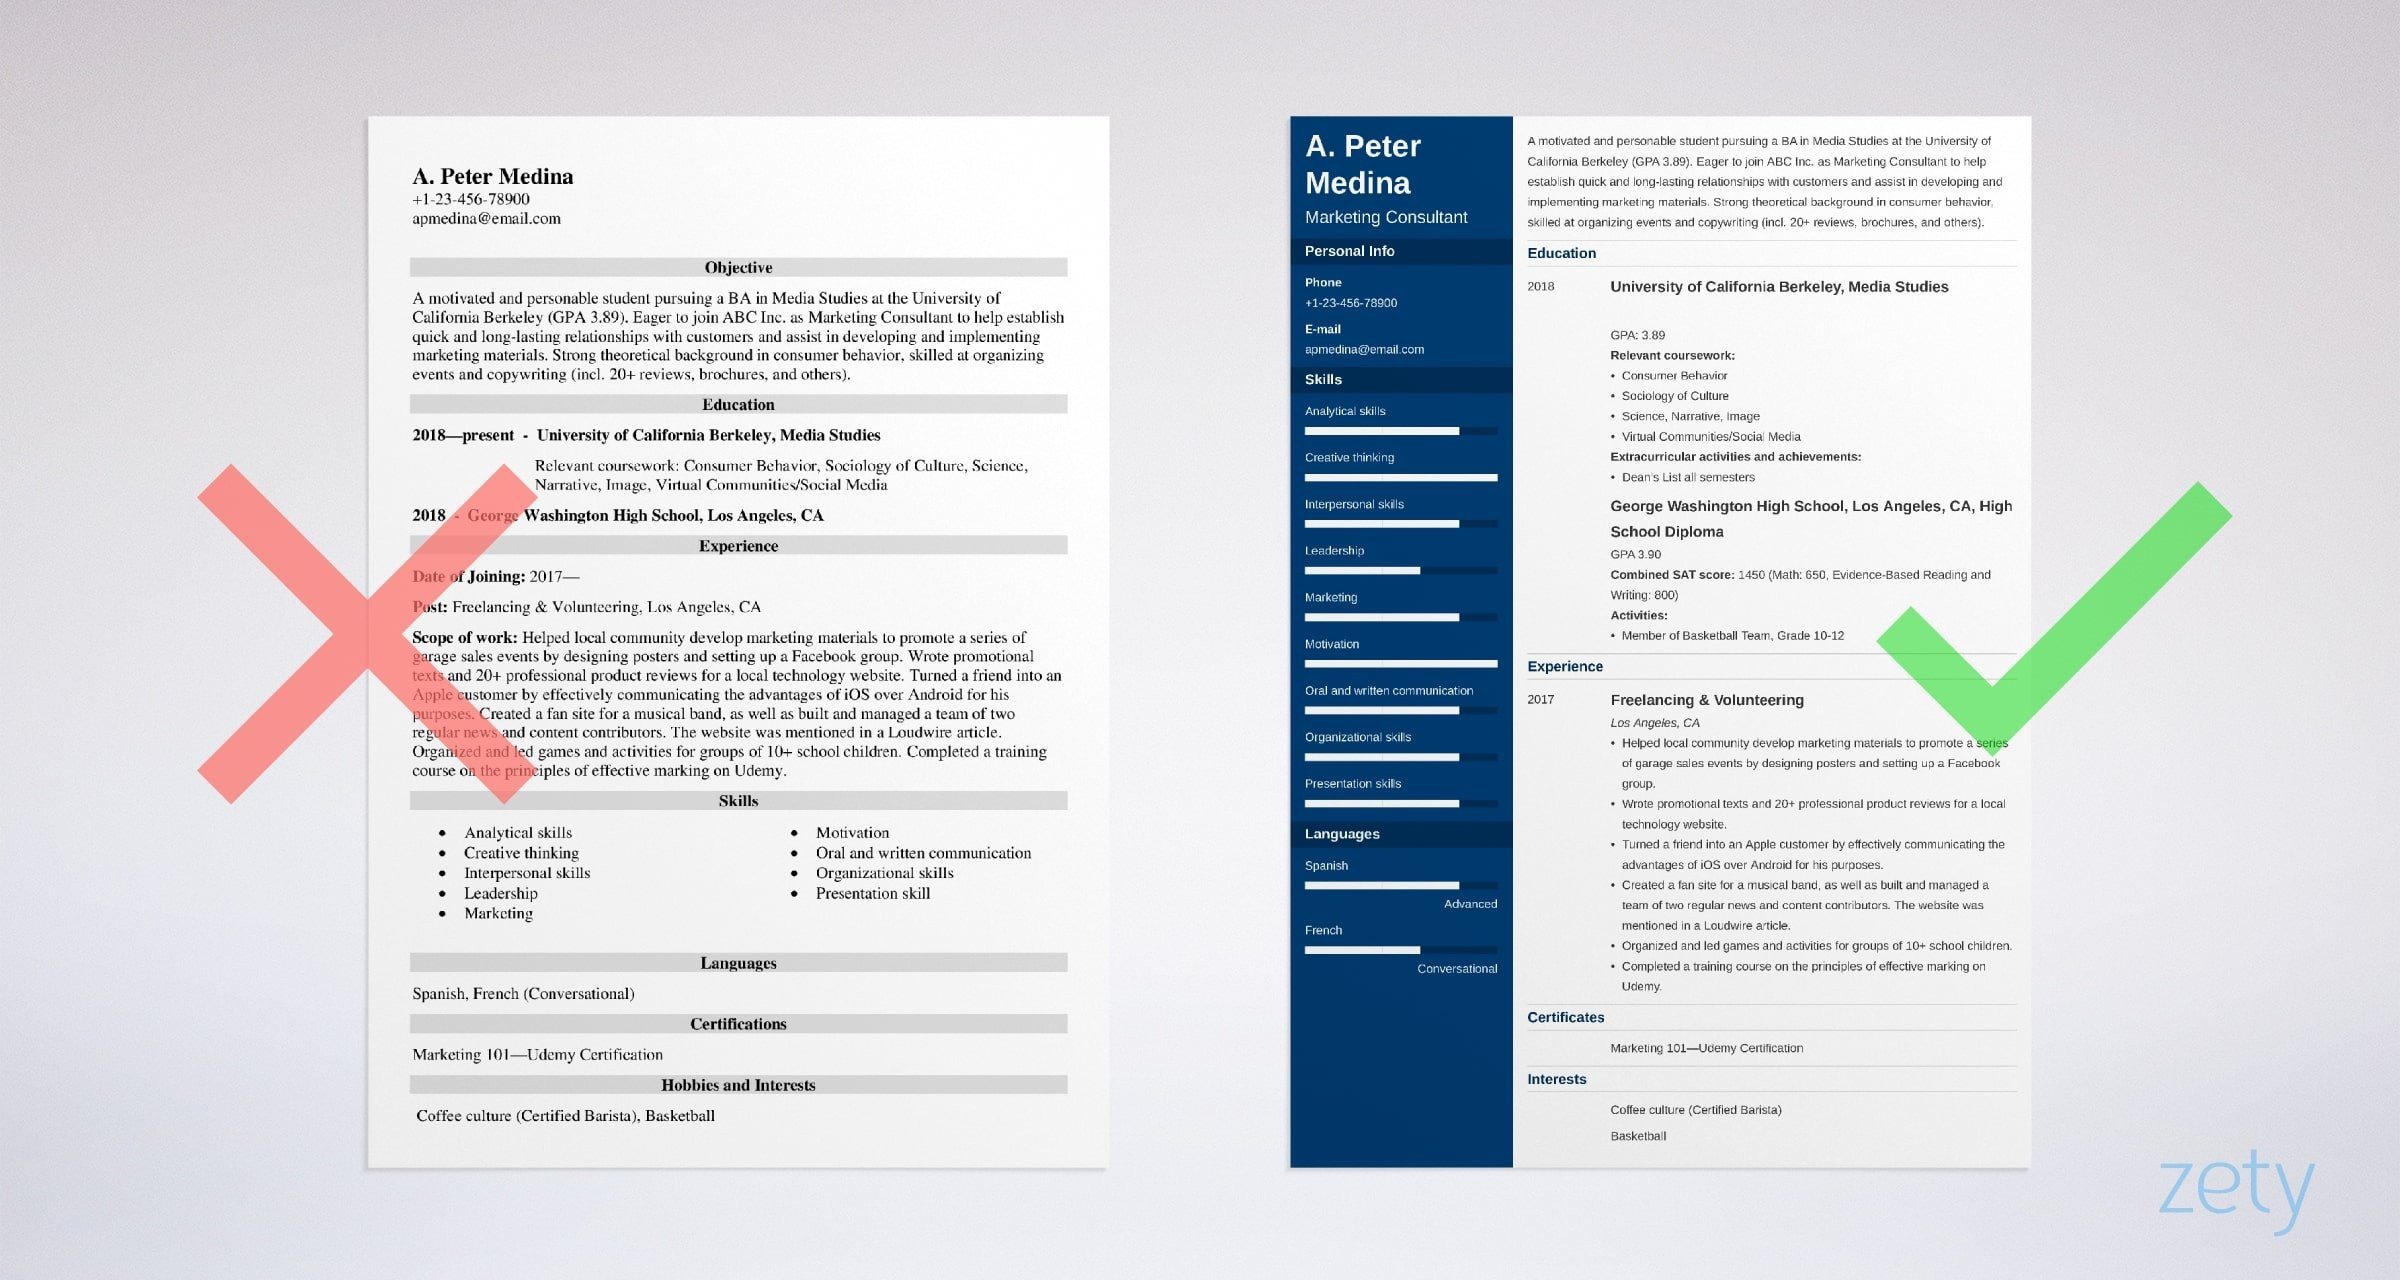 Teenage Resume No Work Experience Template How to Write A Resume with No Experience & Get the First Job